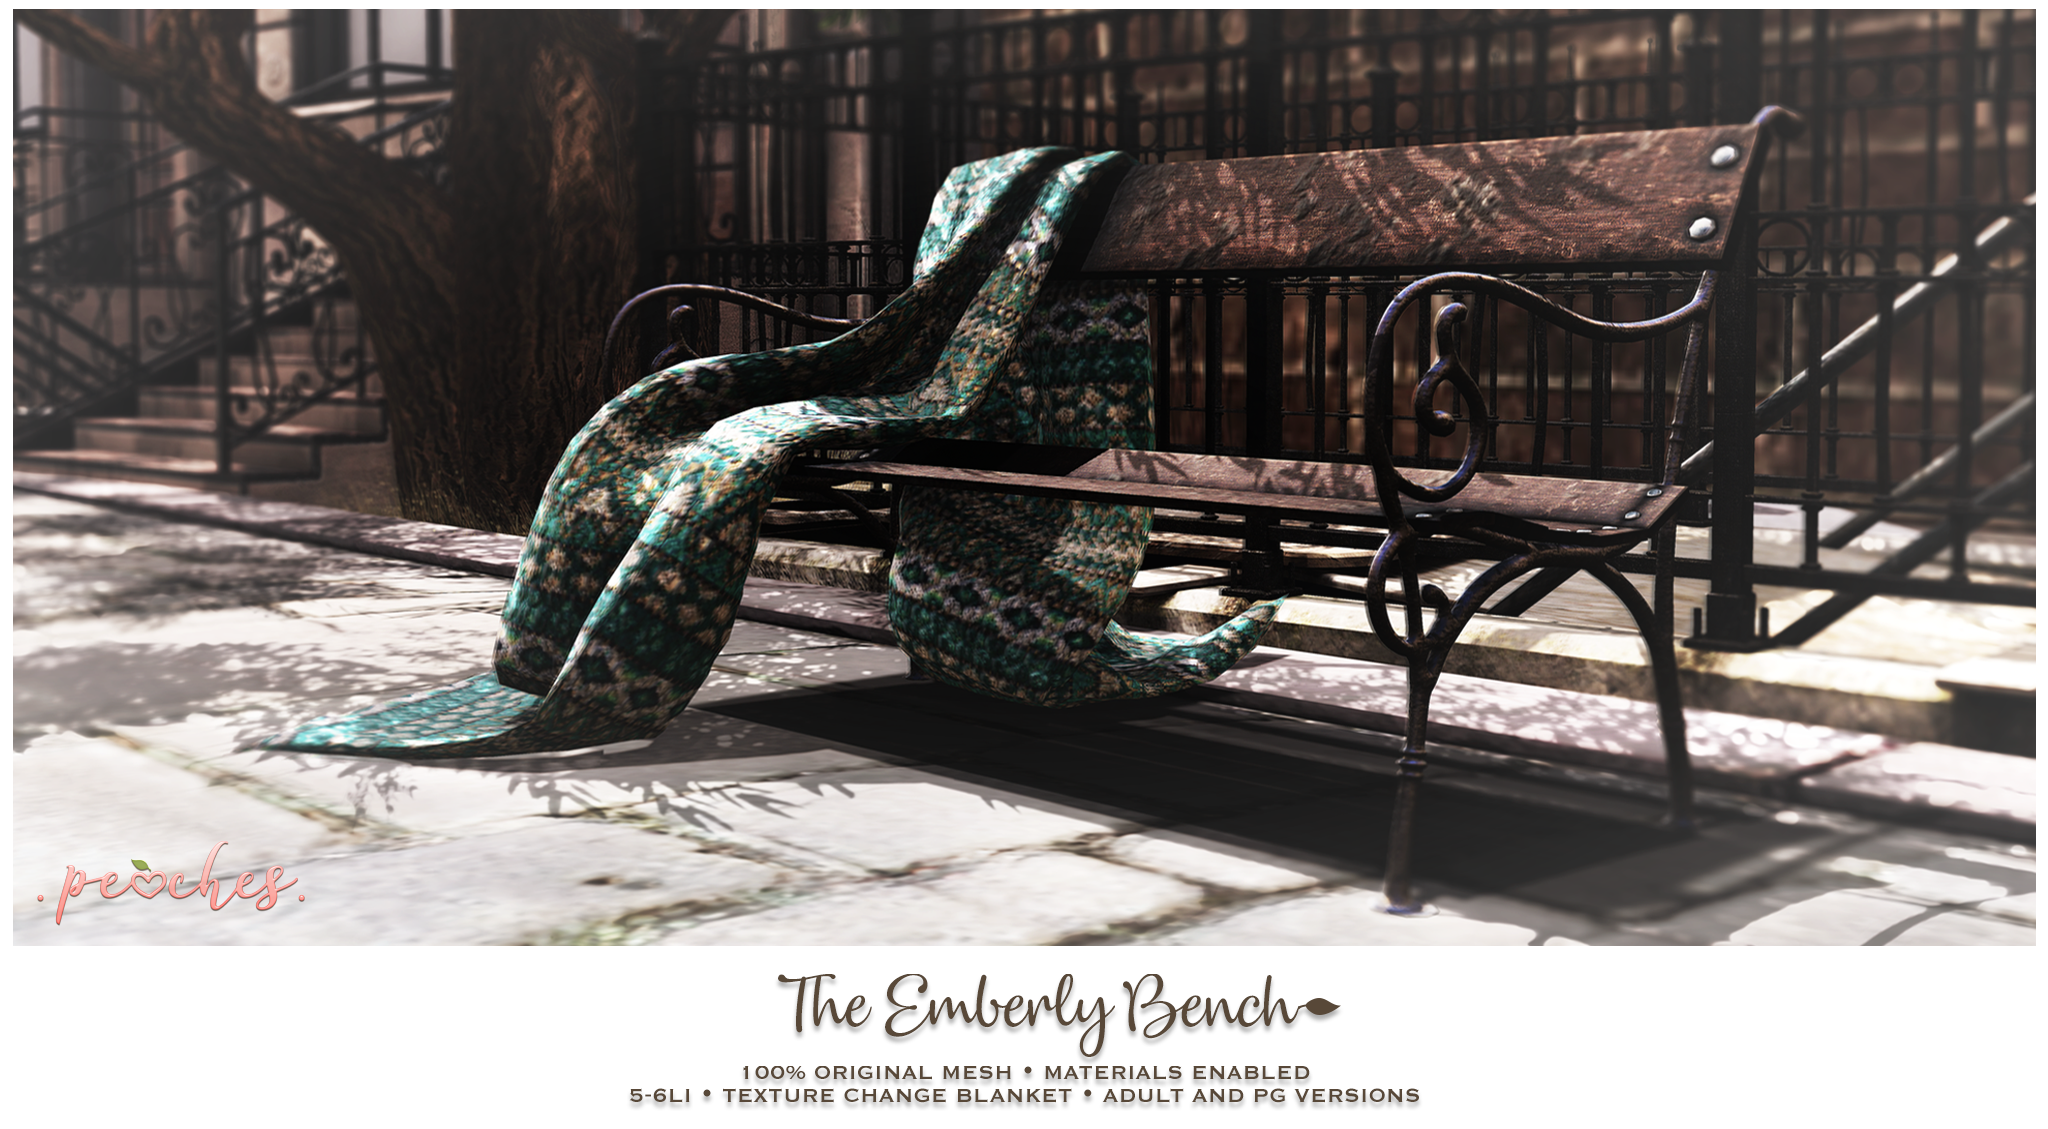 Peaches – Emberly Bench